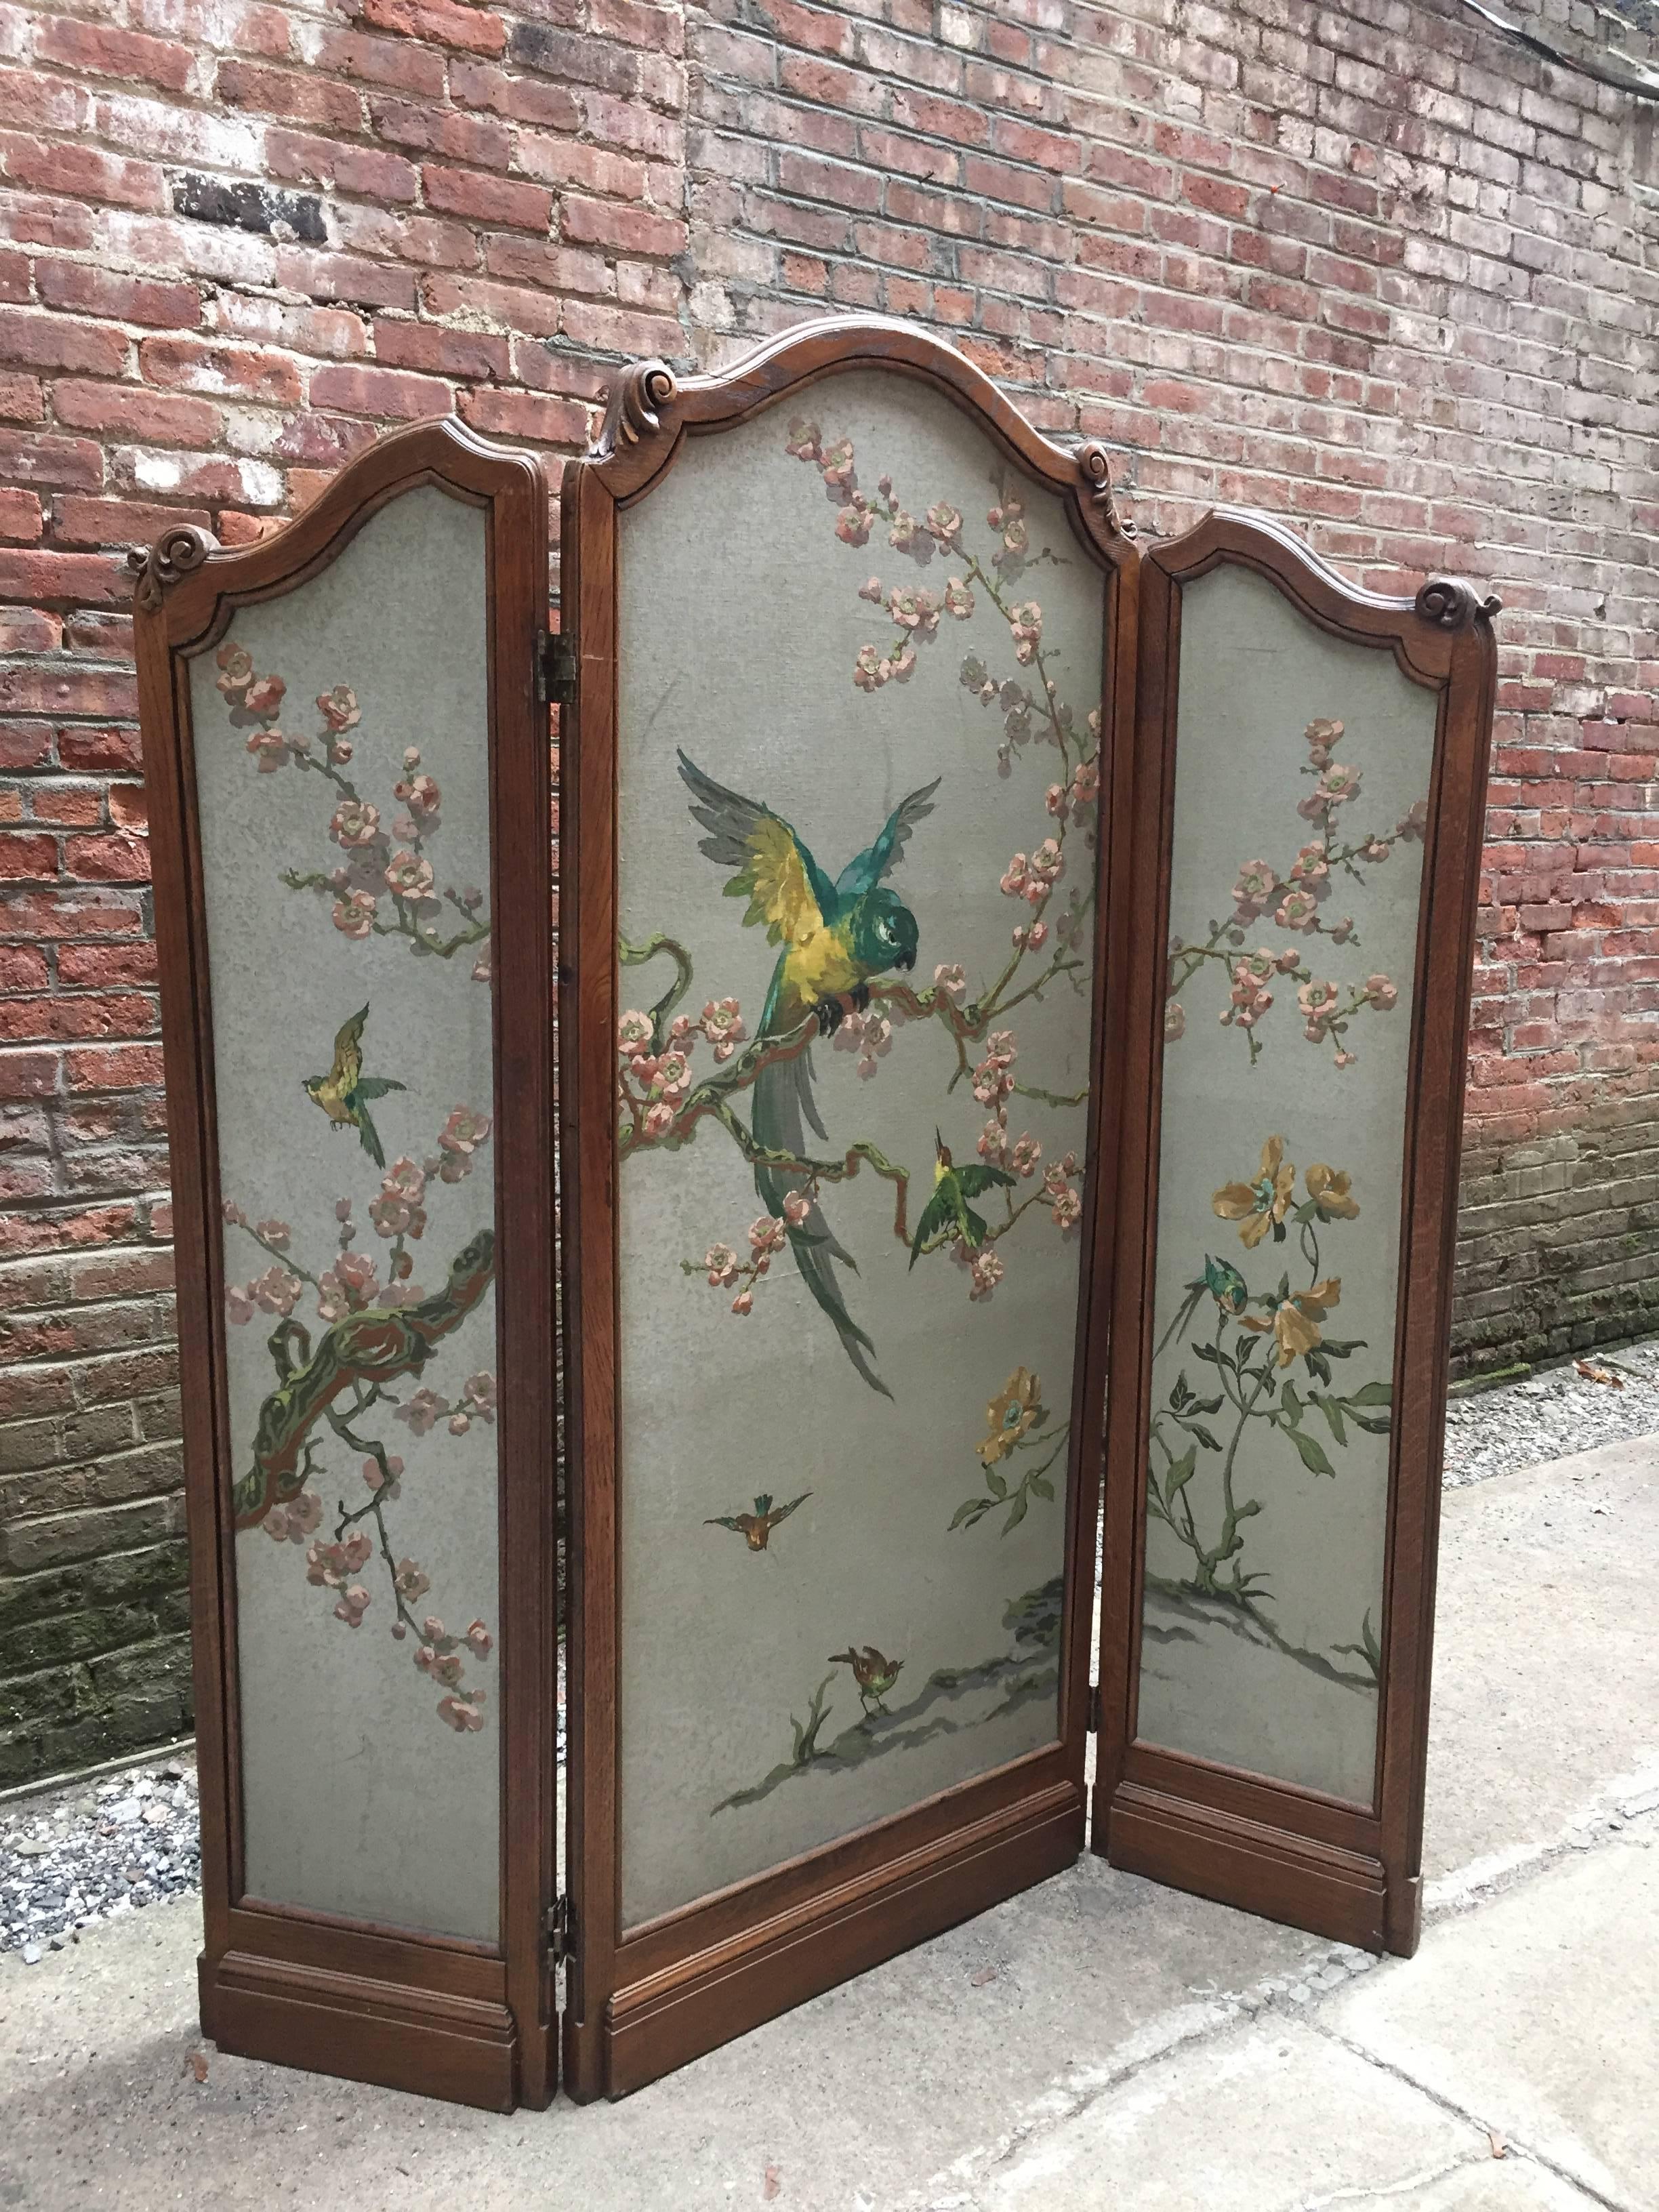 Masterfully hand-painted three part room divider with carved oak frame. Cherry Blossoms and birds decorate one side and verso is adorned with butterflies. The 1930s Japanese inspired screen is a statement for any room. Colorful and